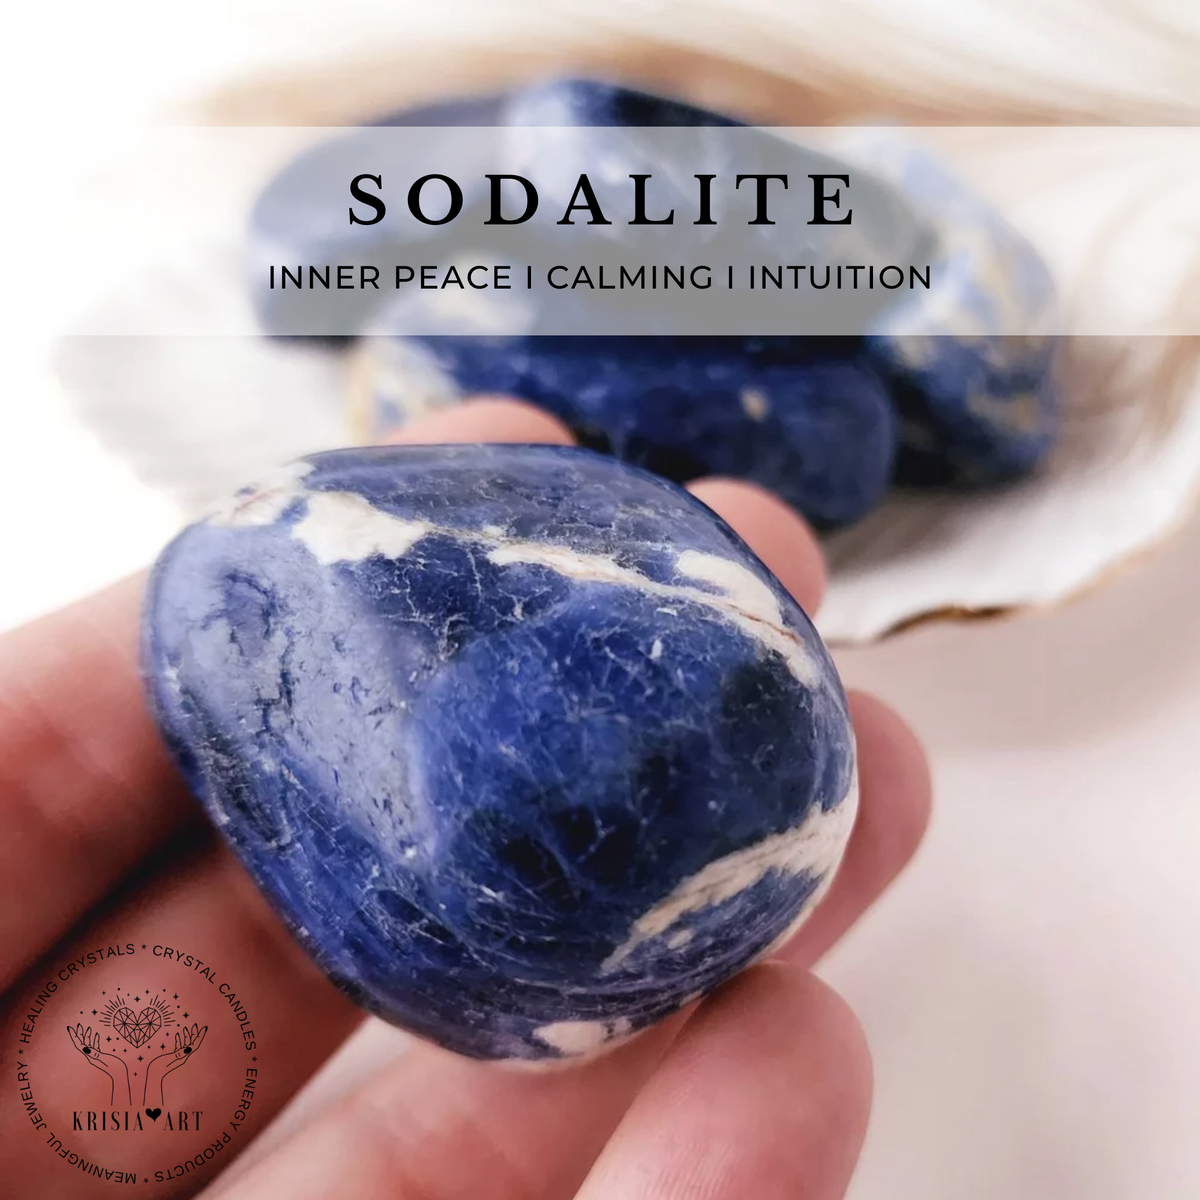 Large SODALITE tumbled stone for inner peace, calming, intuition reiki healing throat chakra meditation